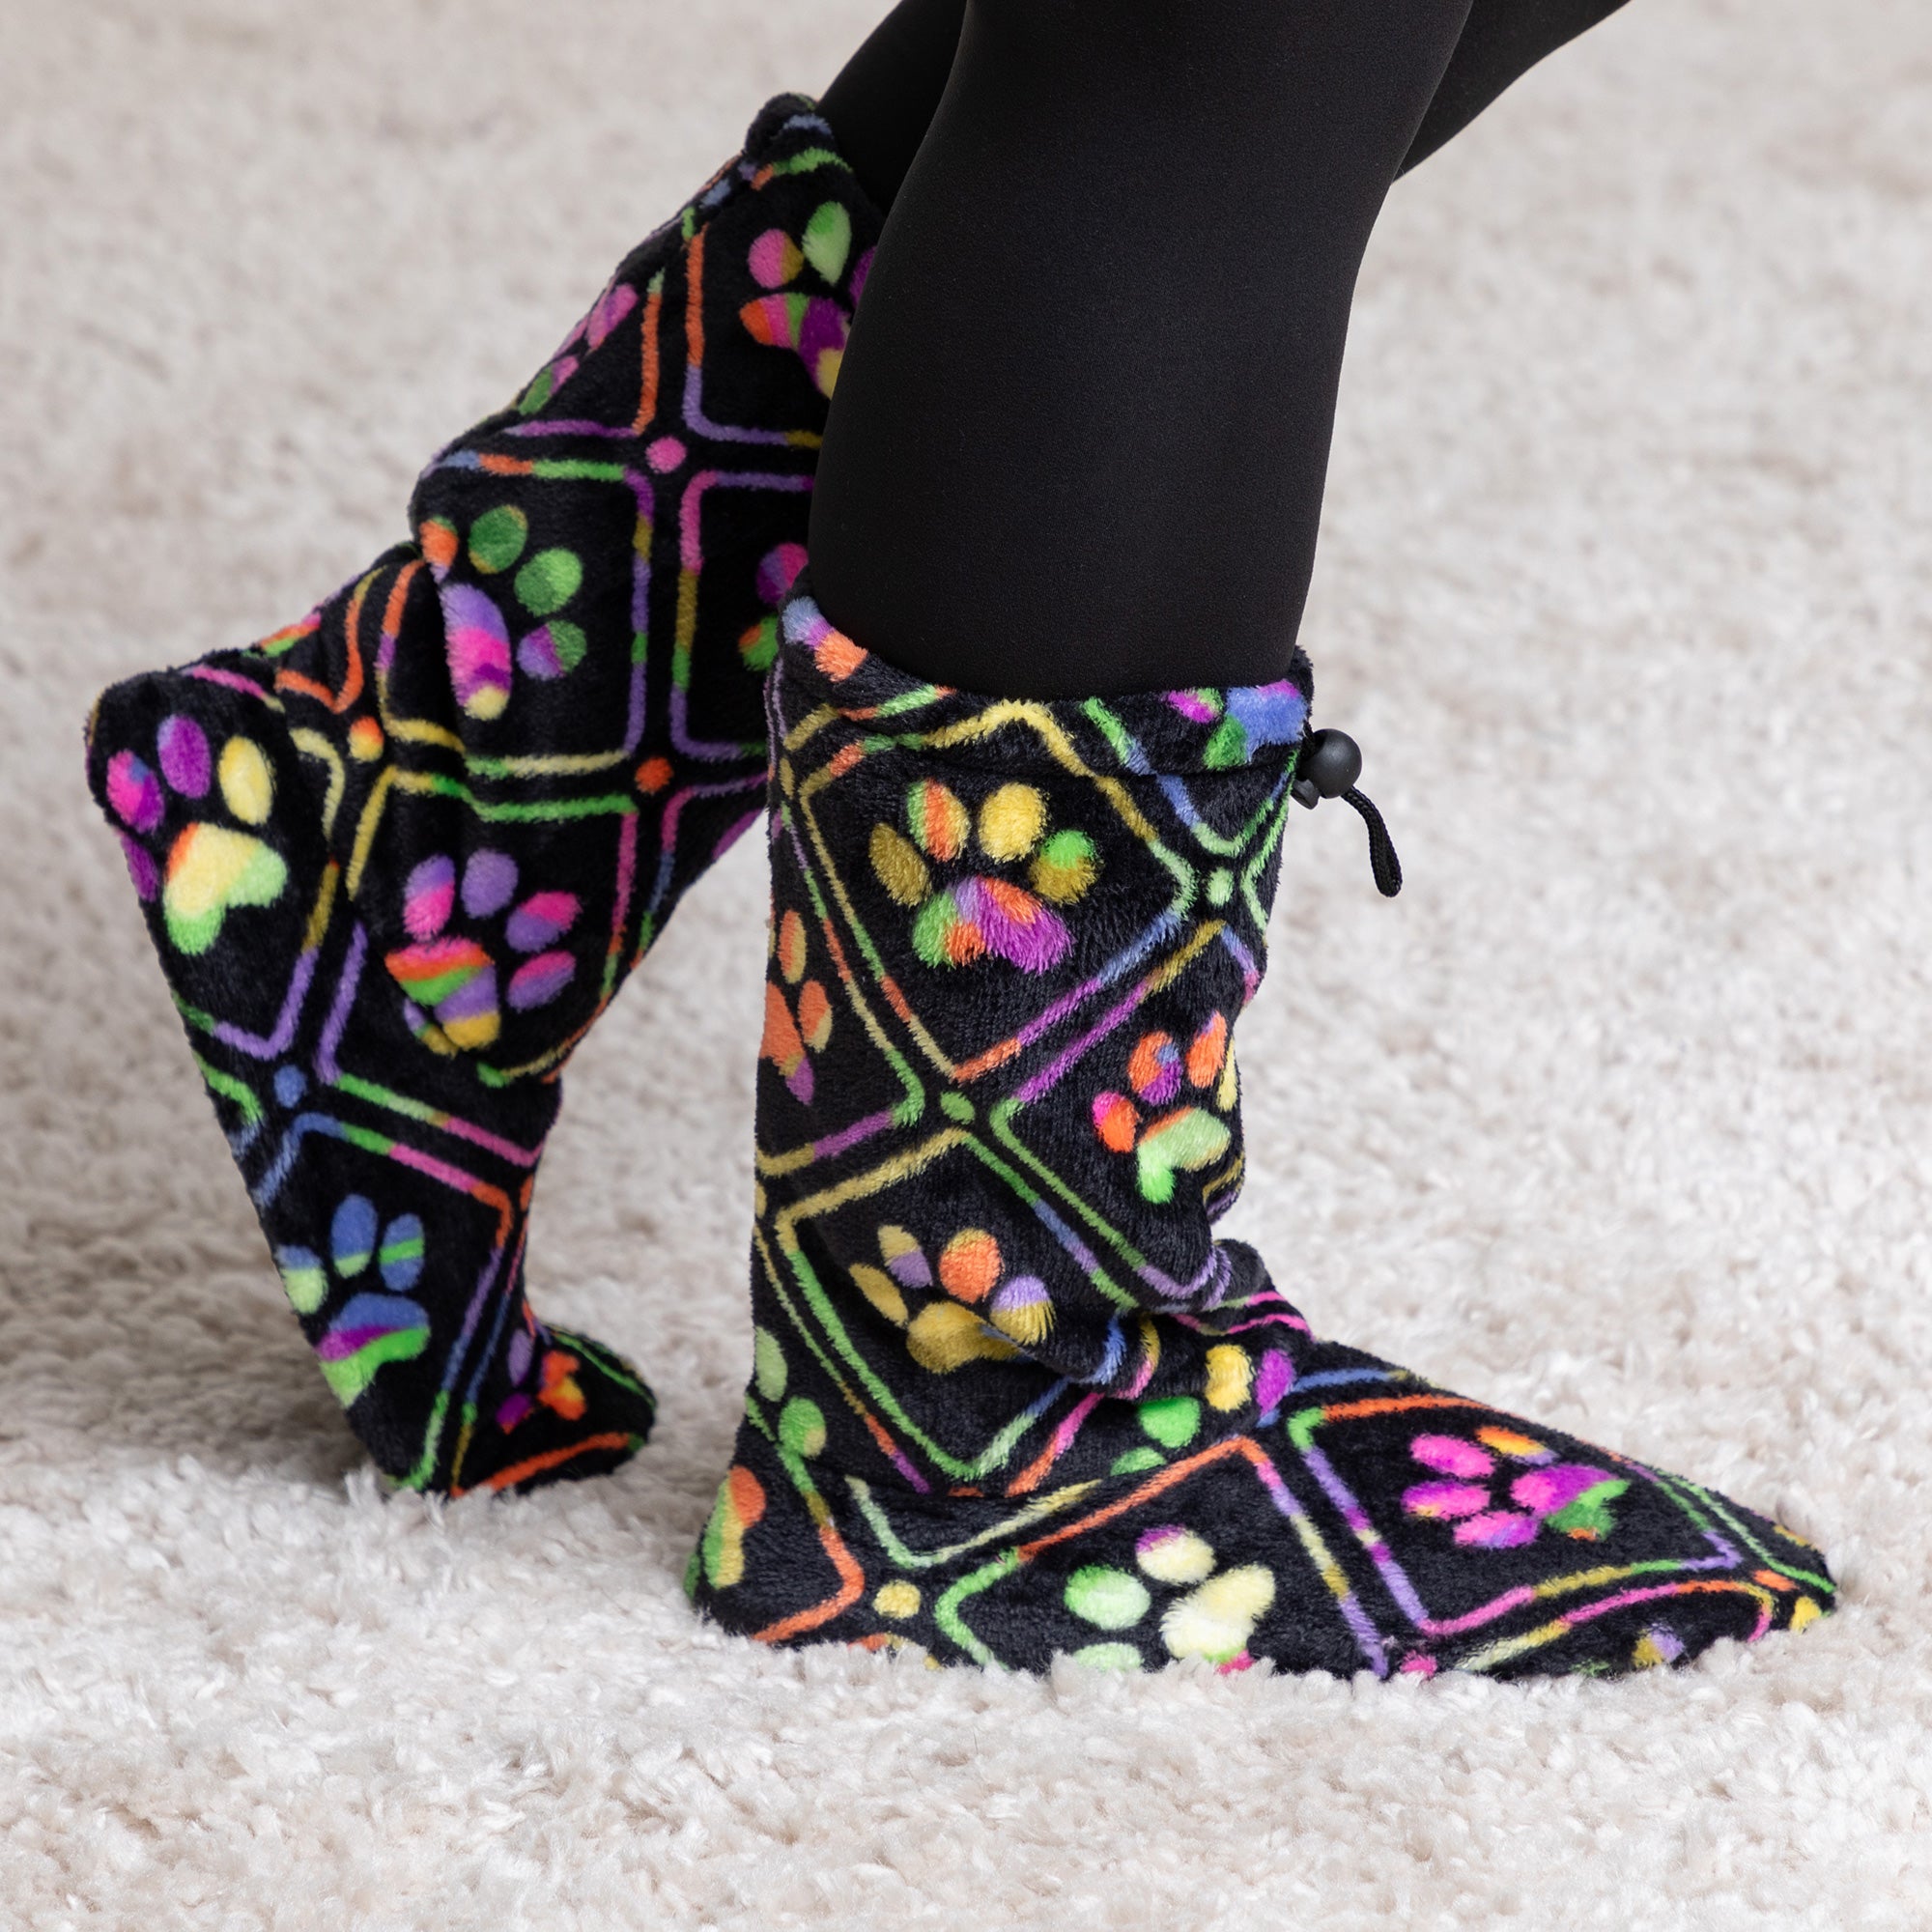 Super Cozy™ Deluxe Paw Non-Slip Toggle Slipper Booties - Neon Grid Paws - L/XL